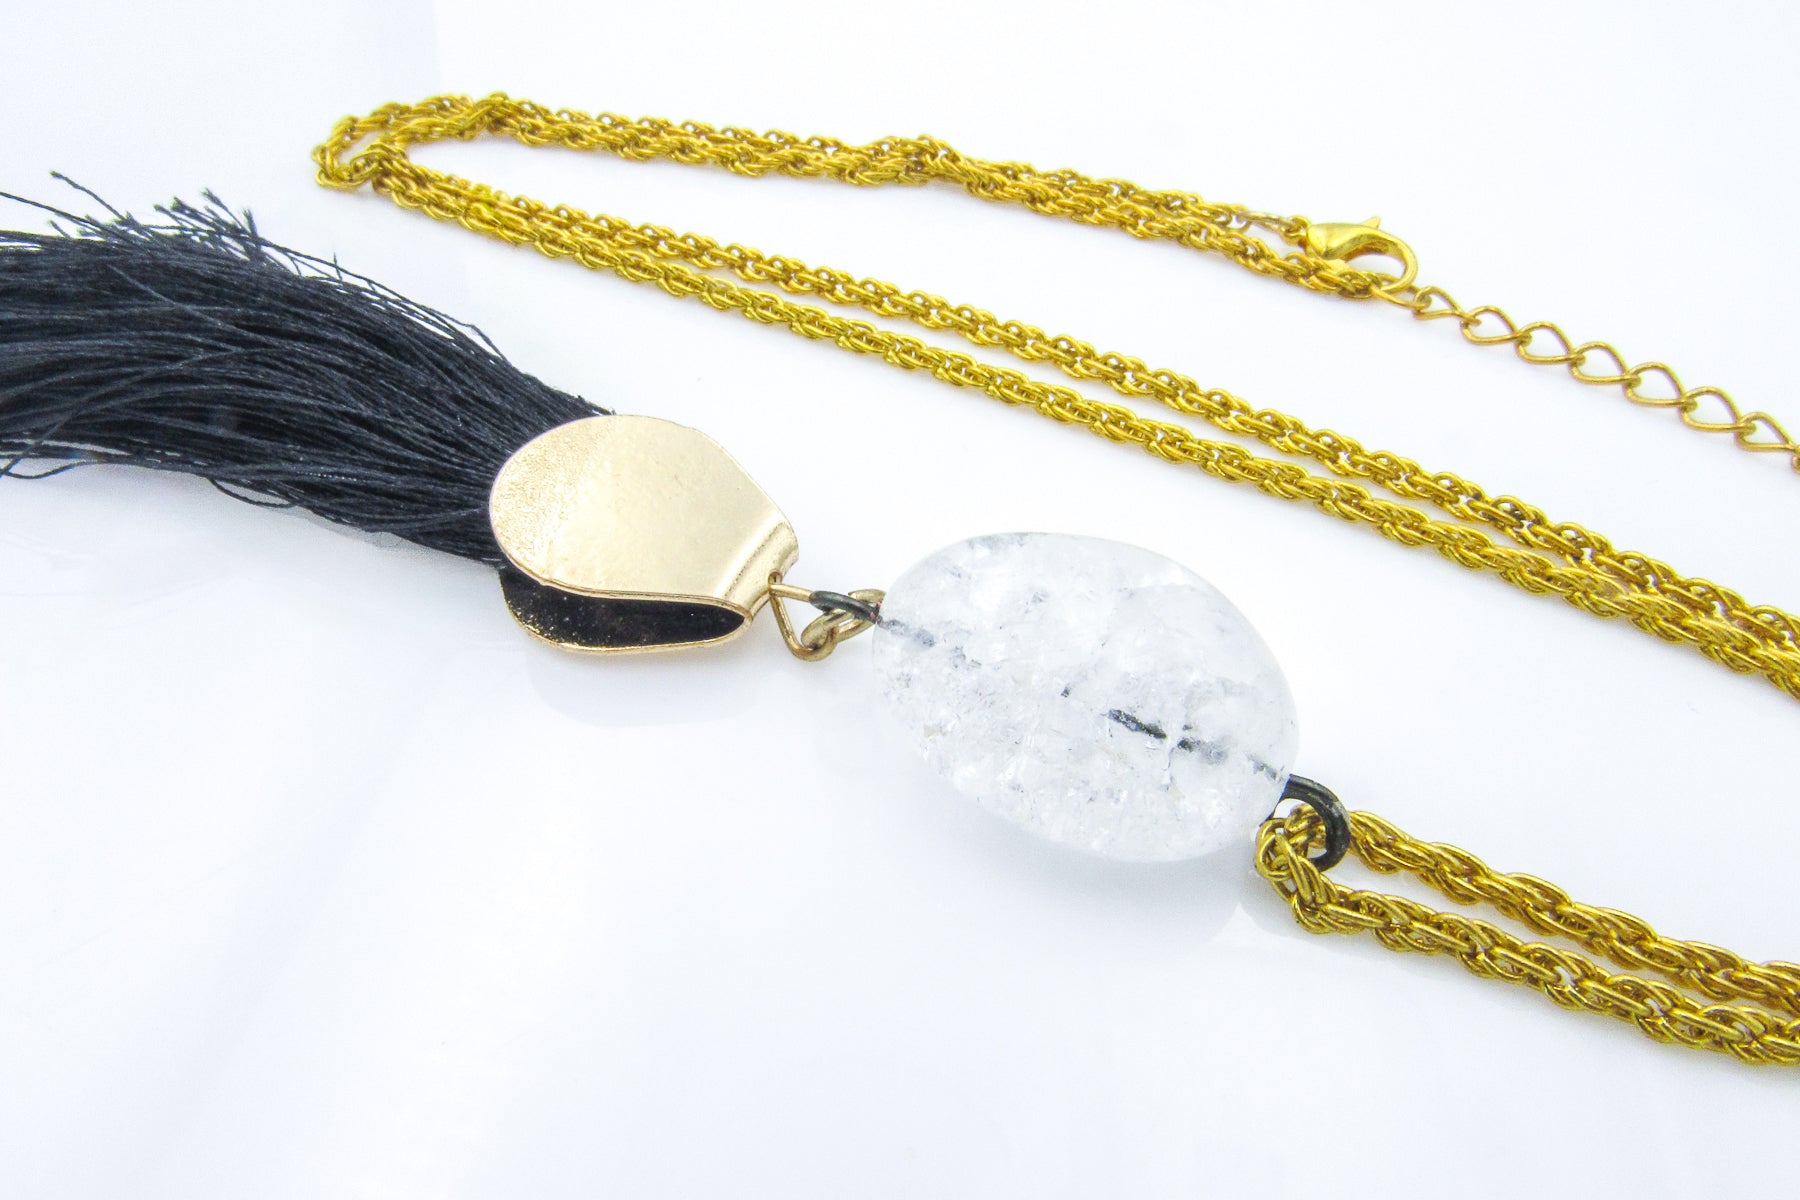 Cracked Quartz Pendant with Tassel Rope Chain Necklace